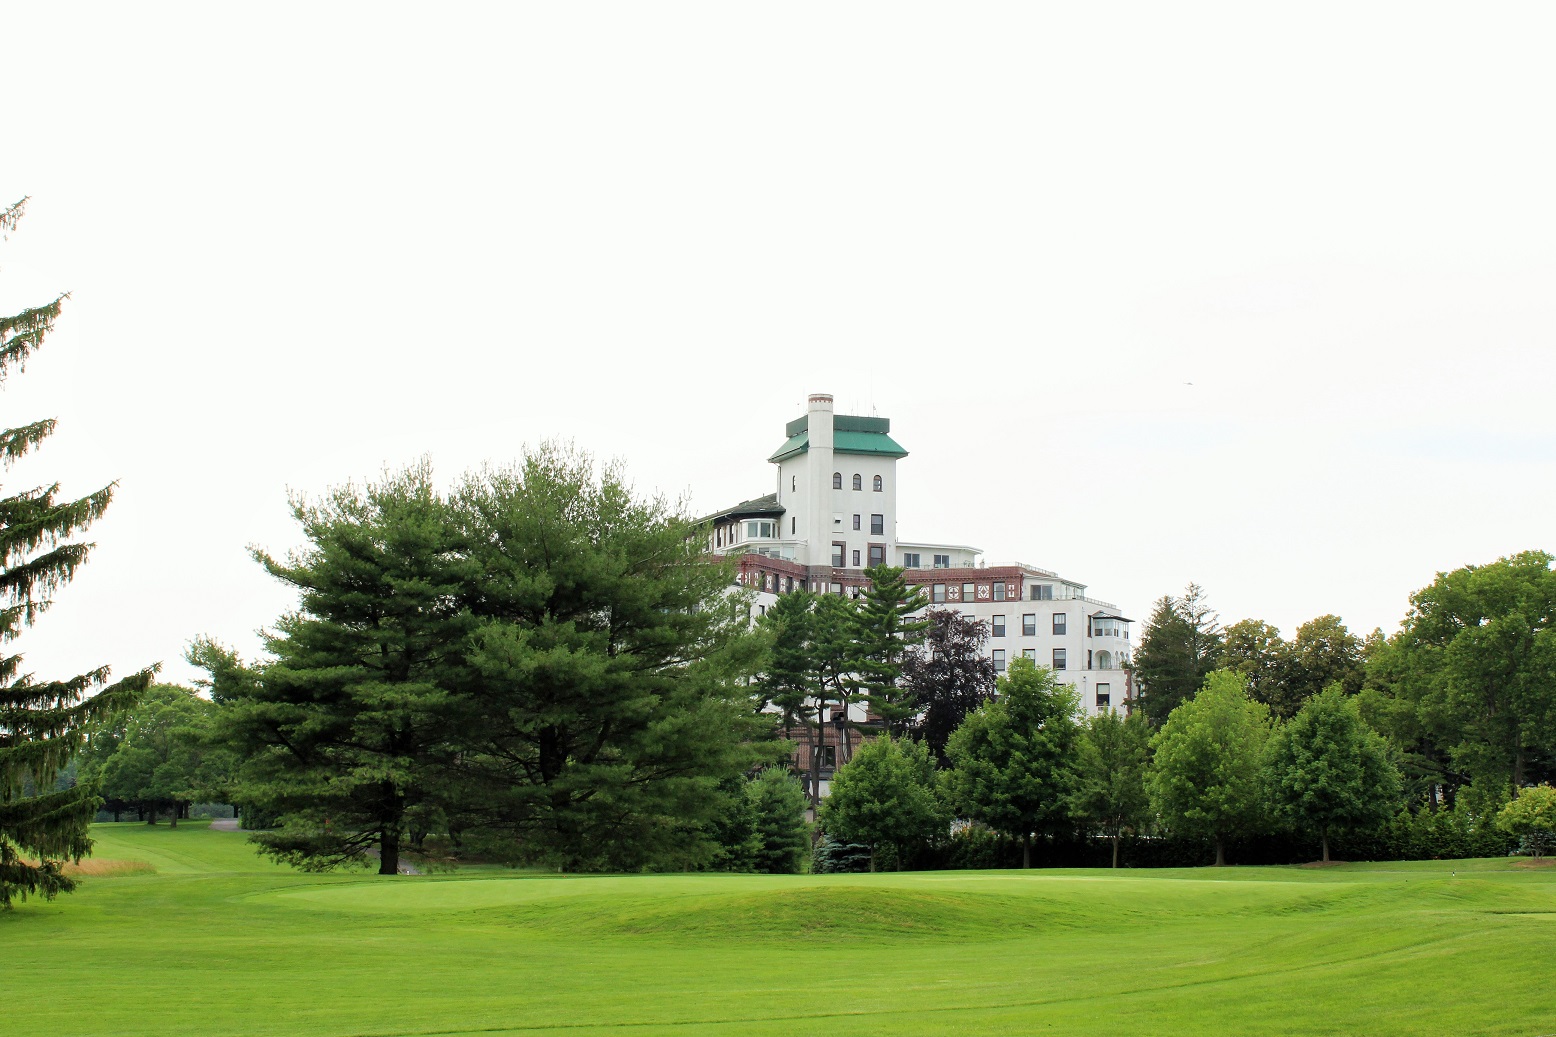 Westchester Country Club